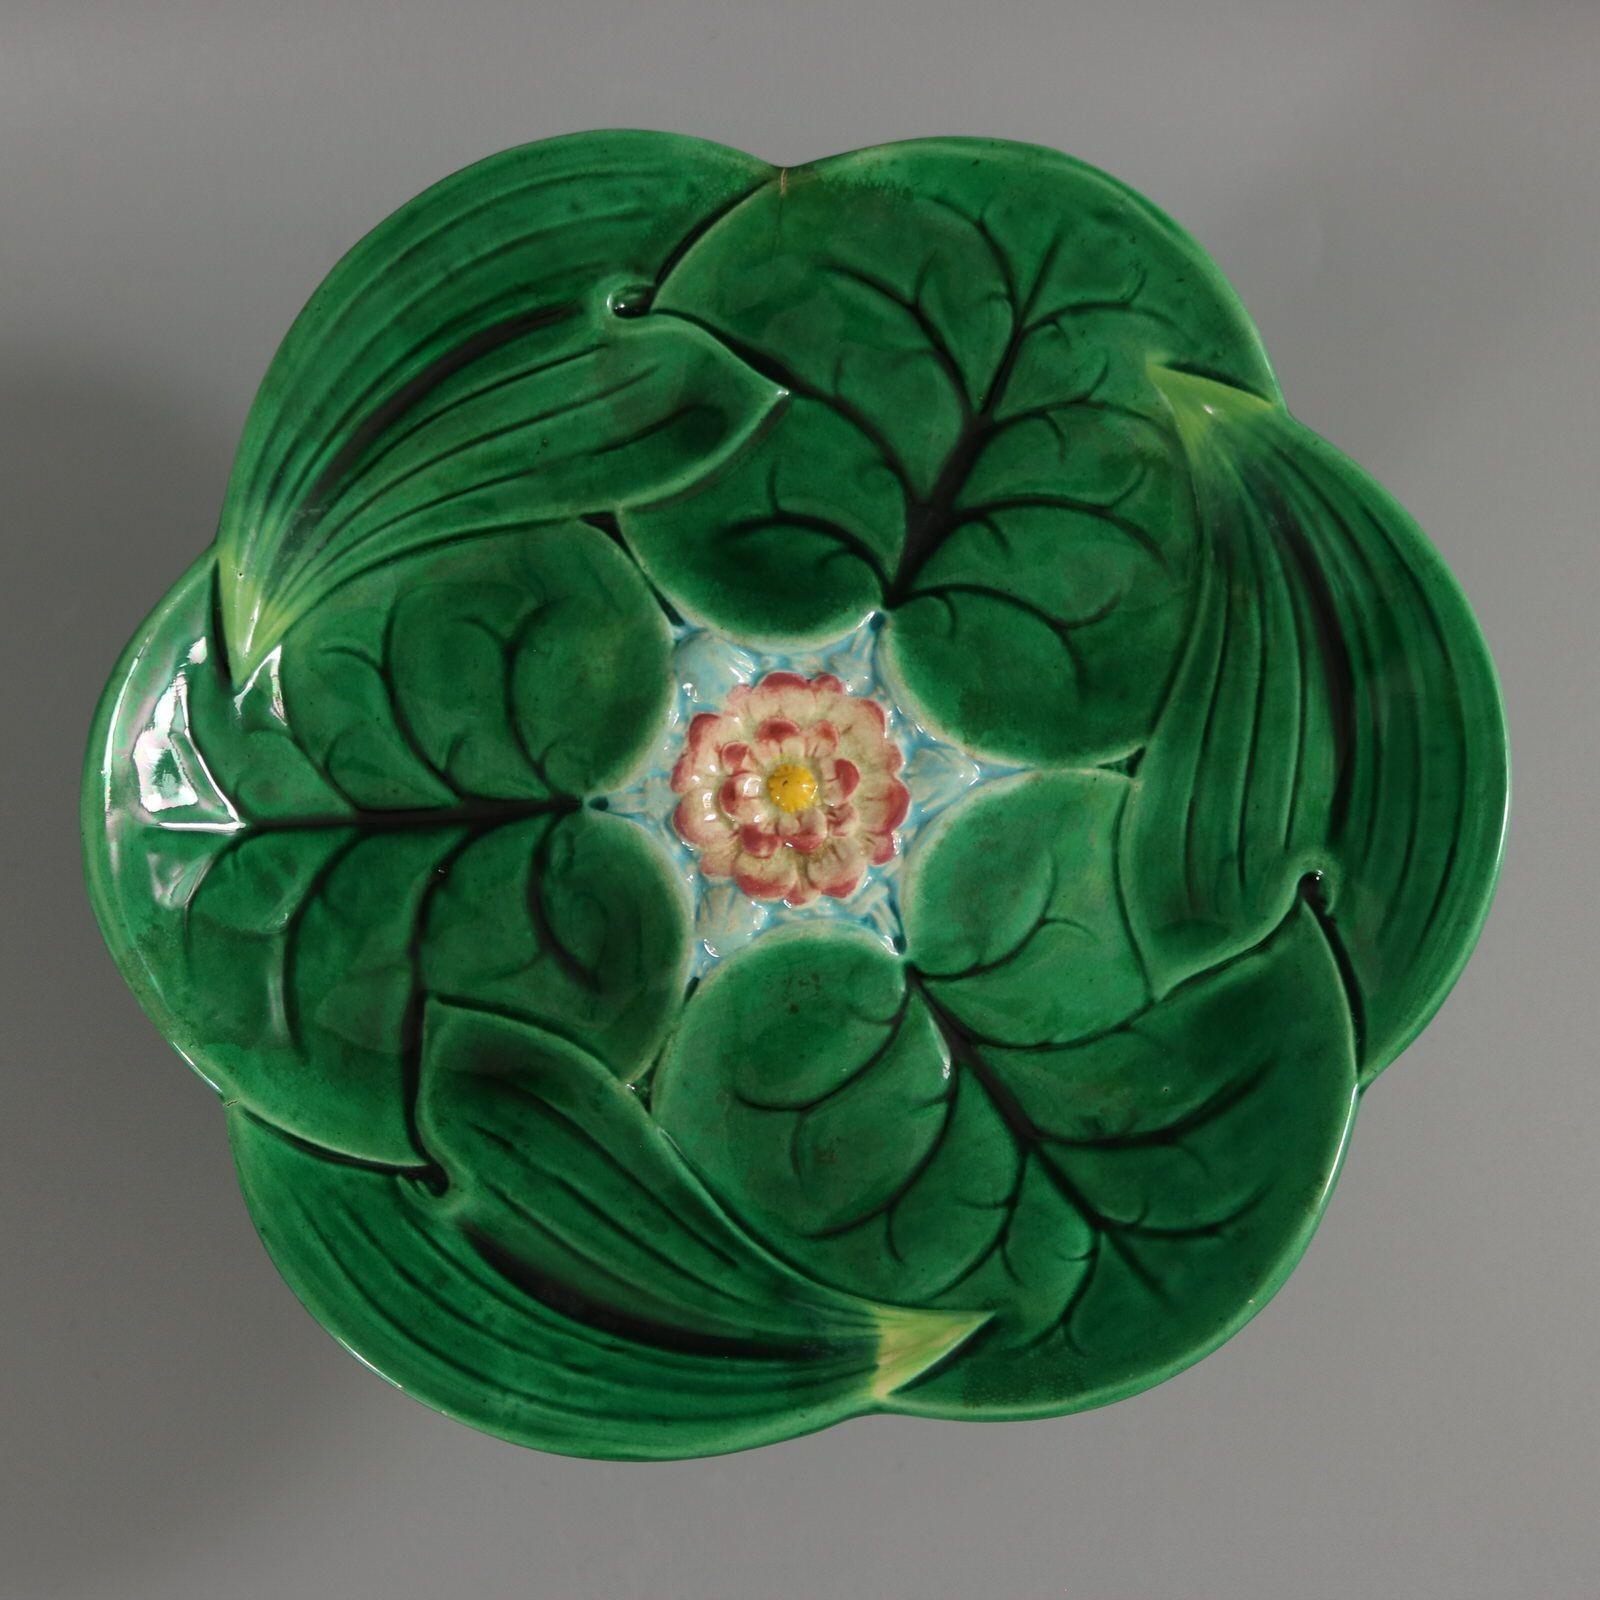 George Jones Majolica compote which features a pond lily flower surrounded by overlapping leaves. The pedestal modelled with leaves and a lily flower. Colouration: green, turquoise, pink, are predominant.